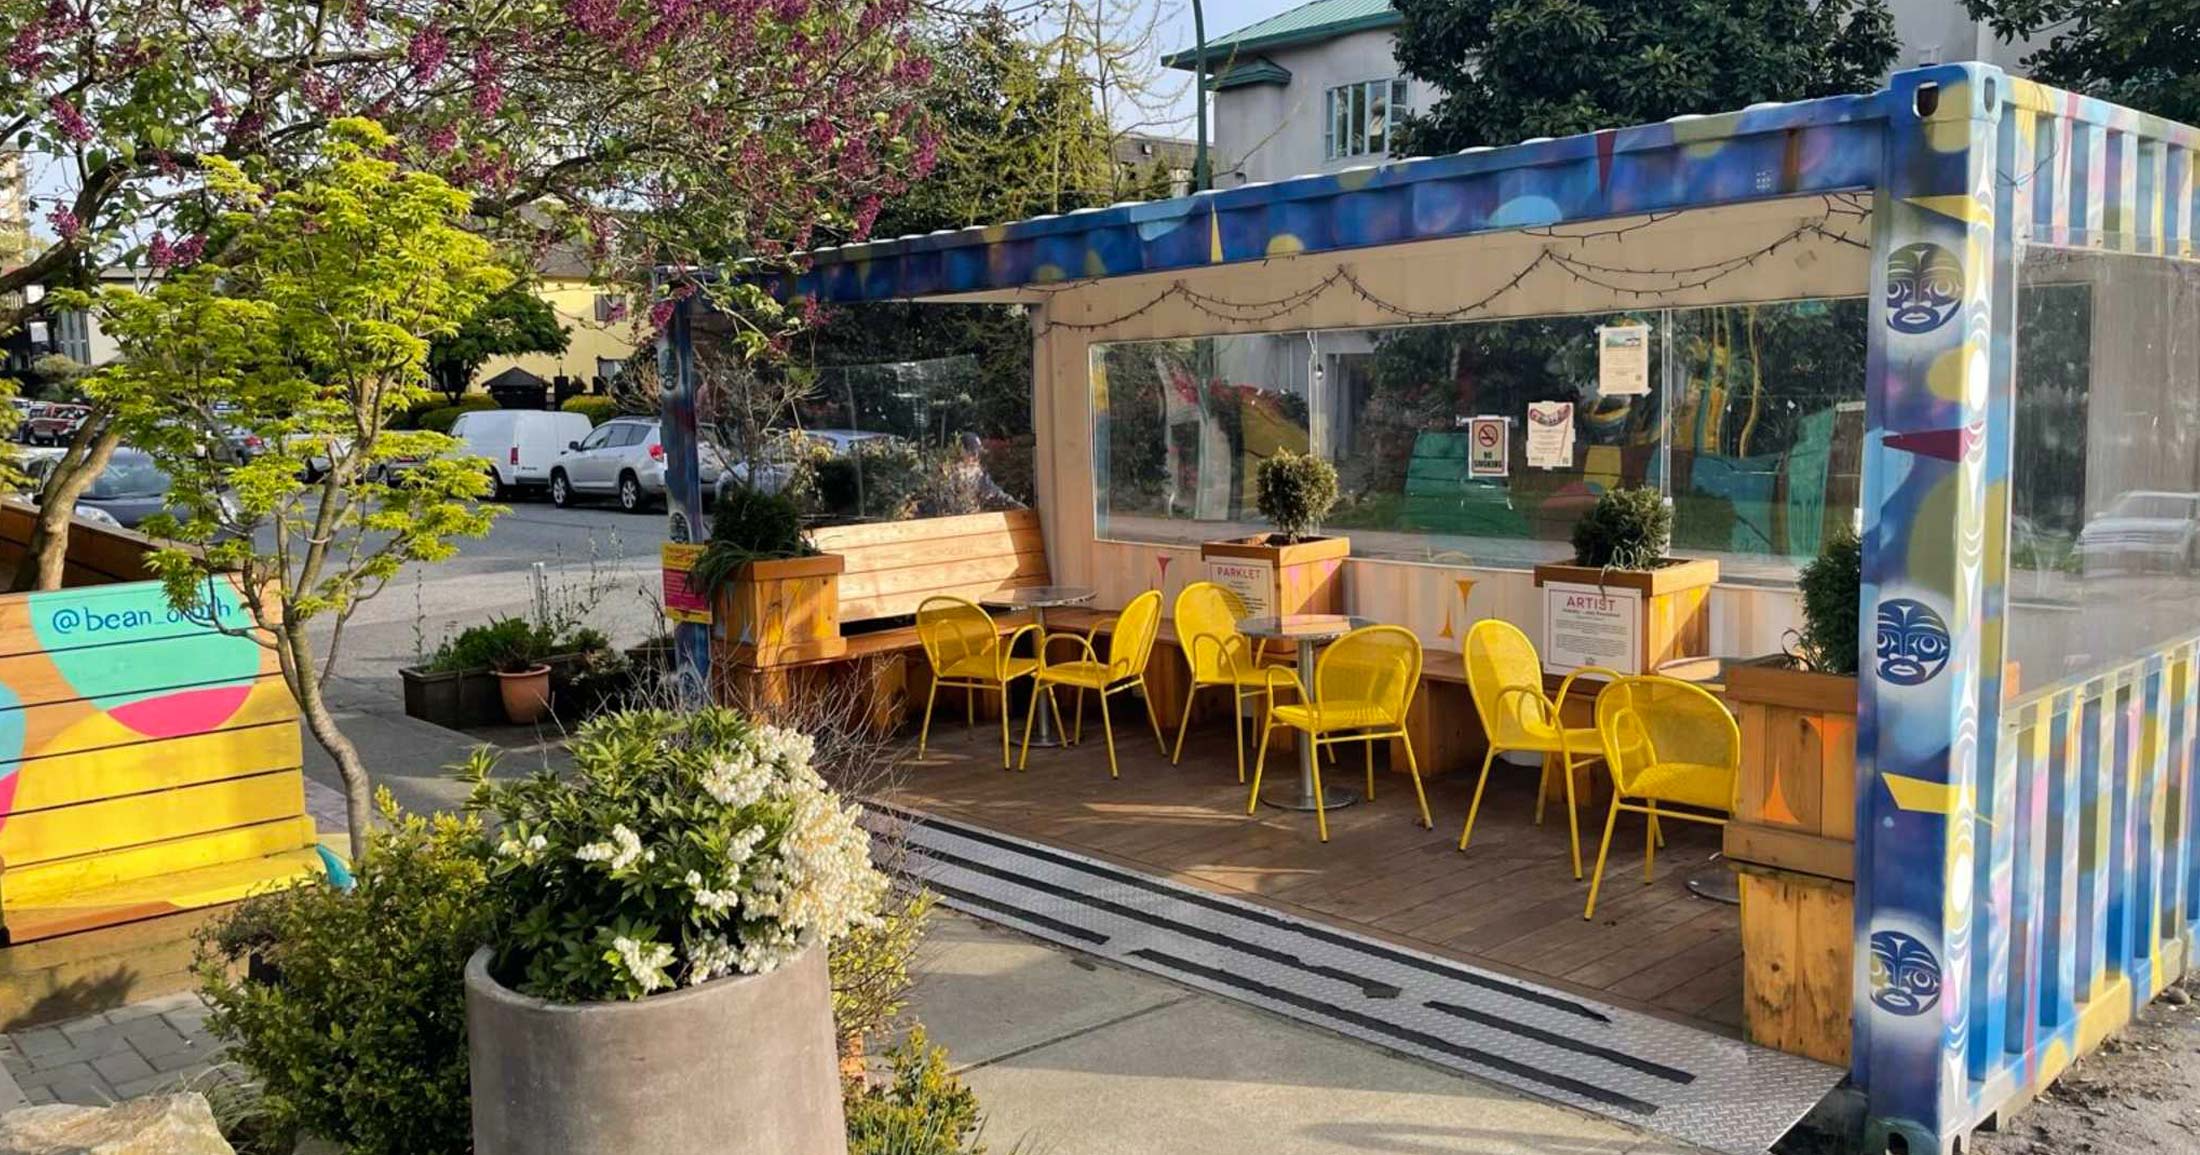 A parklet in front of Quayside Cohousing featuring a converted and painted shipping container with outdoor seating and plants.